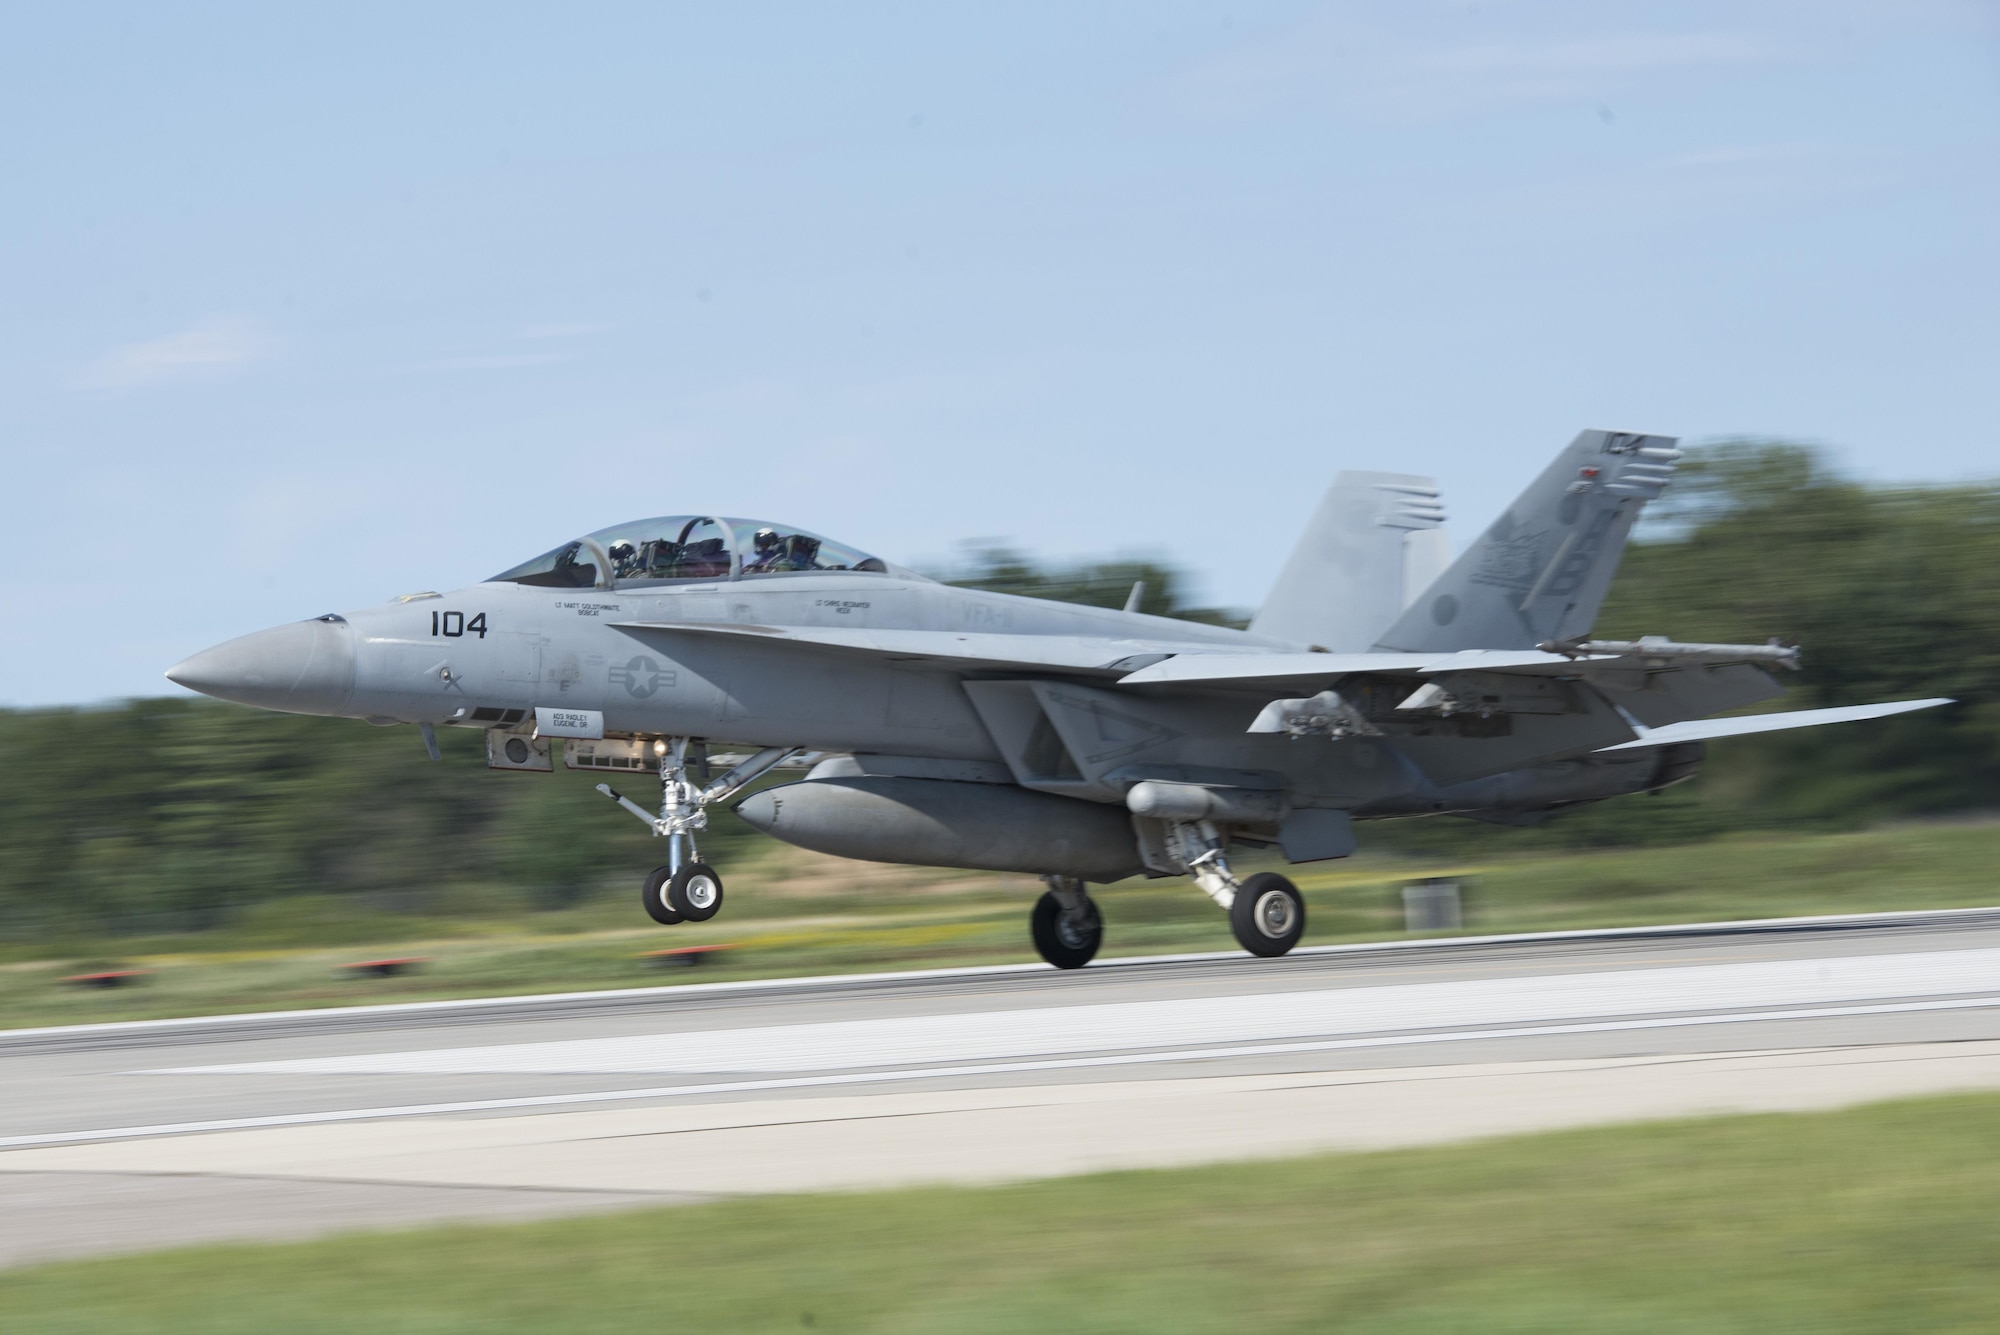 An 11th Strike Fighter Squadron FA-18F Super Hornet lands at Volk Field, Wis. Aug. 22, 2016, during Northern Lightning. Northern Lightning is a tactical-level, joint training exercise that emphasizes fifth and fourth generation assets engaged in a contested, degraded environment. (U.S. Air Force photo by Senior Airman Stormy Archer)